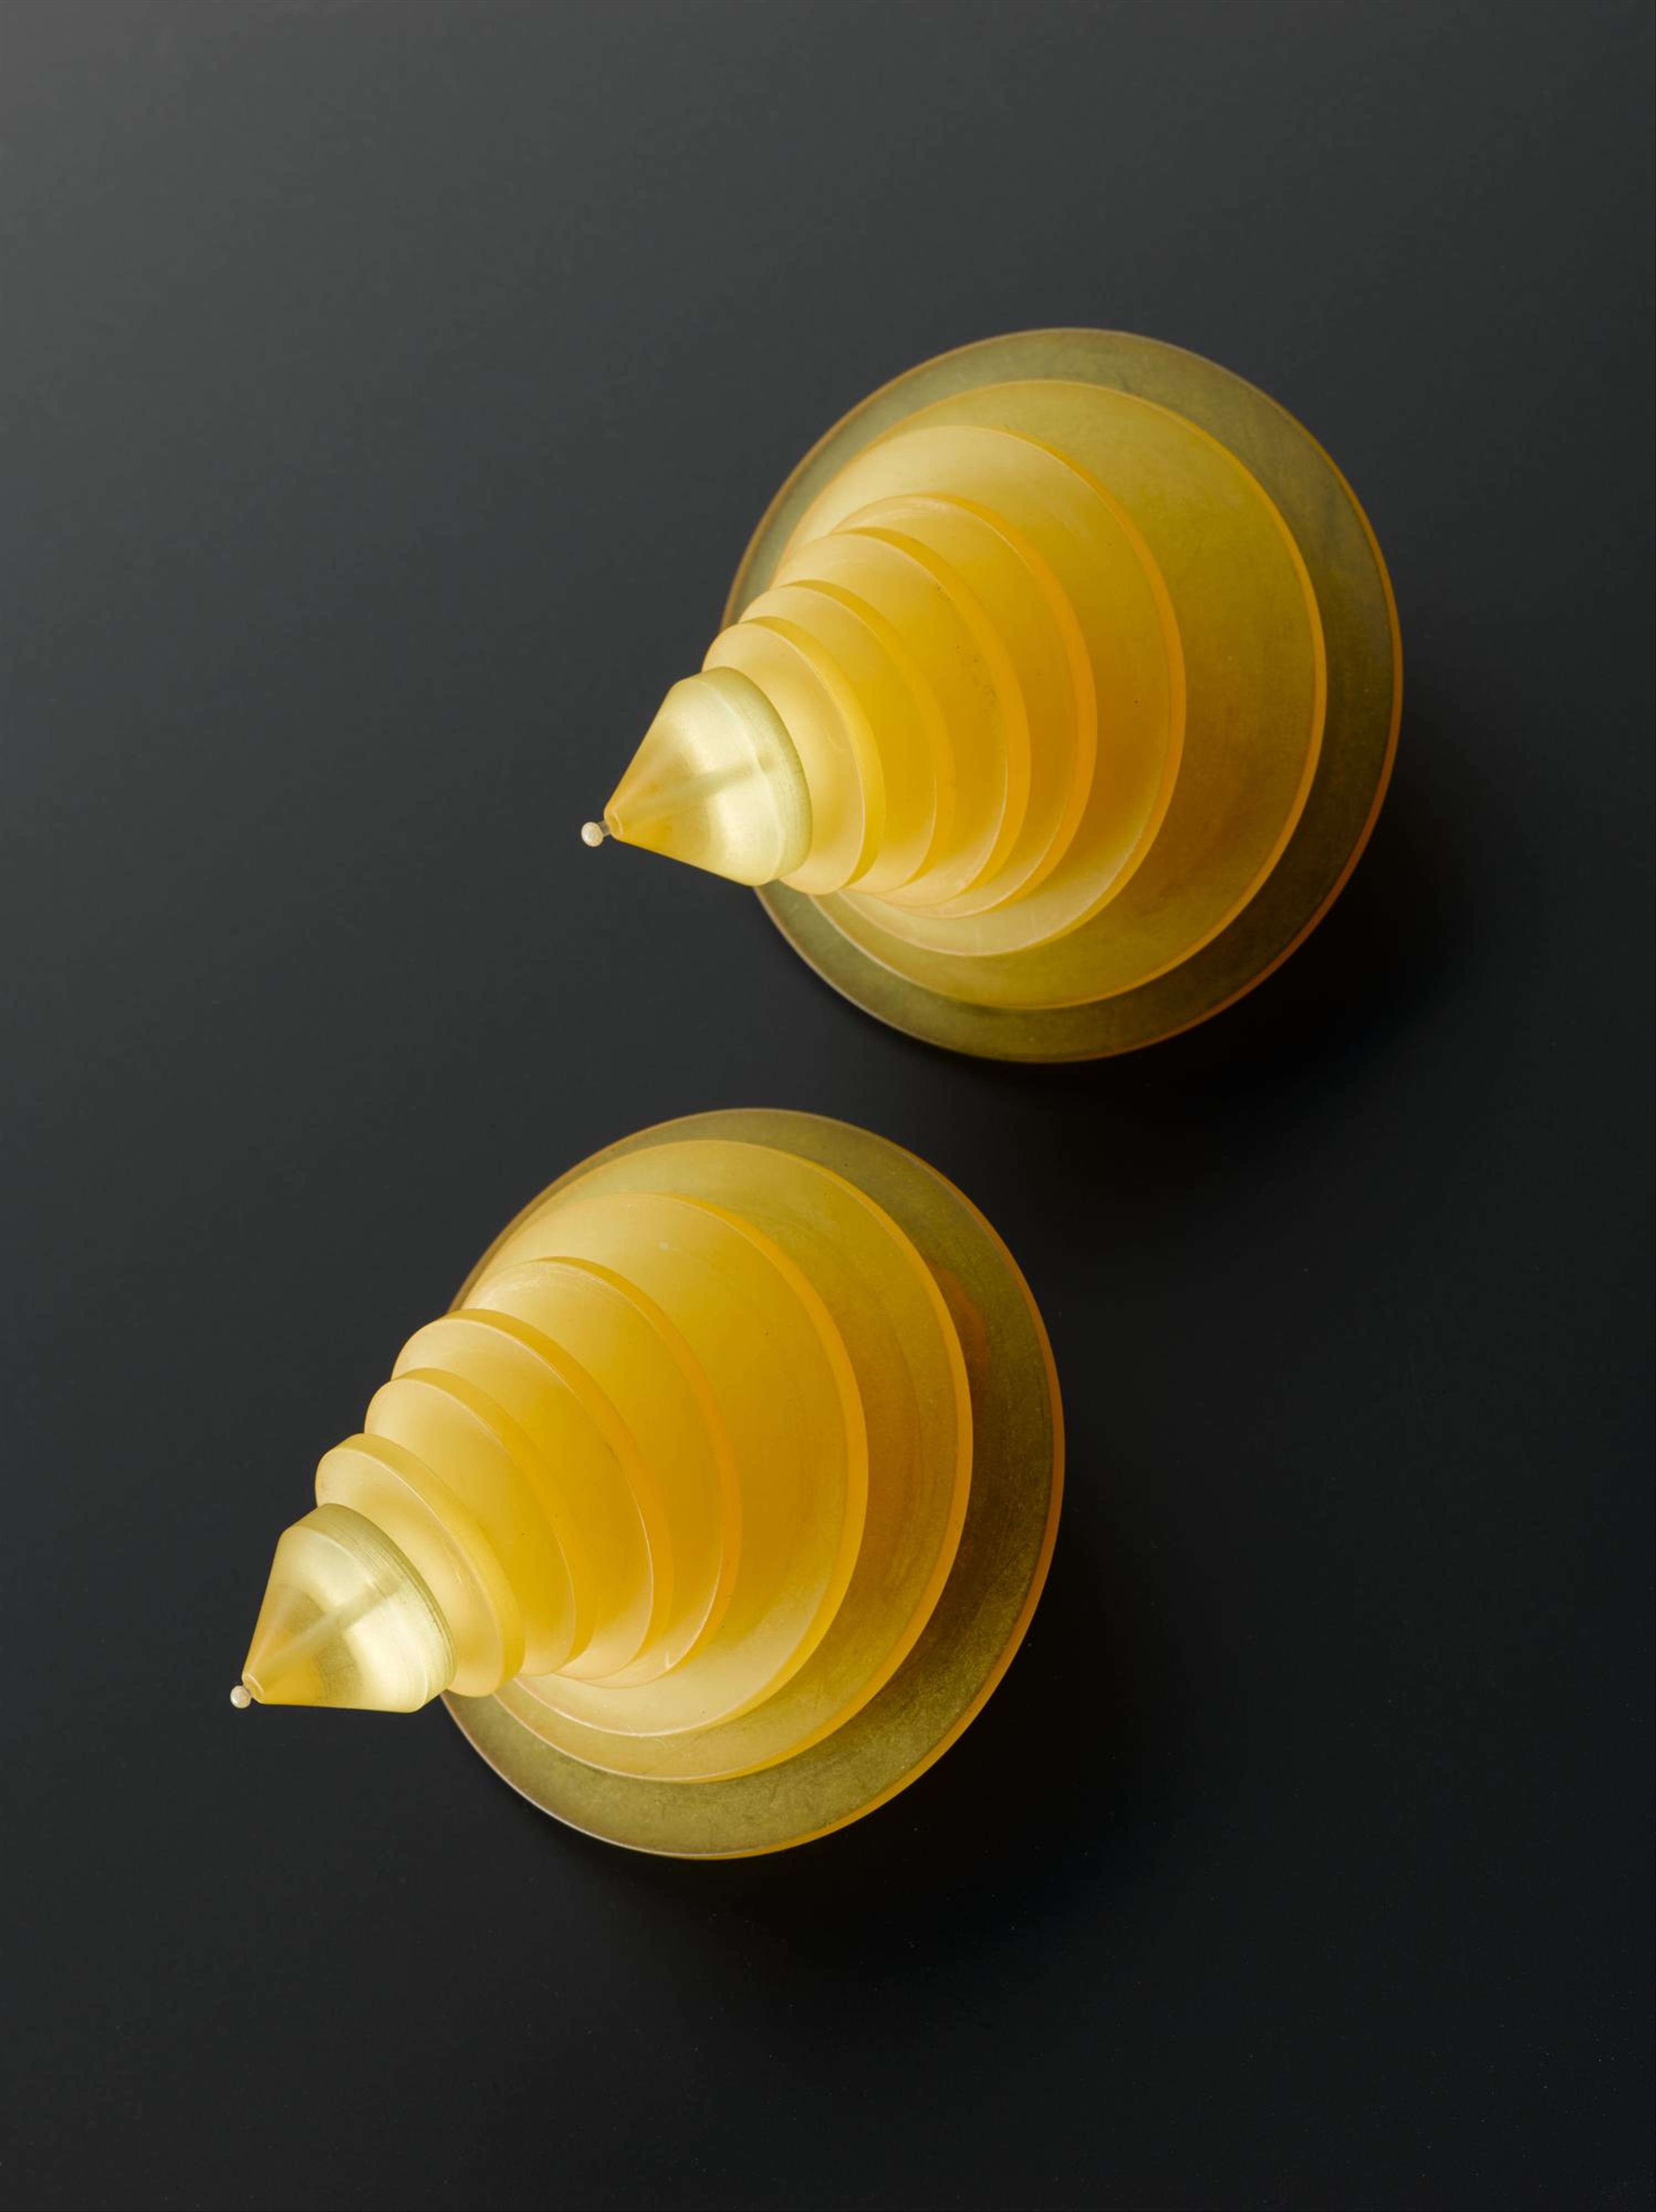 Clip-on earrings of translucent yellow acrylic: British, designed for Jean Muir by C & N Buttons & Jewellery Production, 1980s.